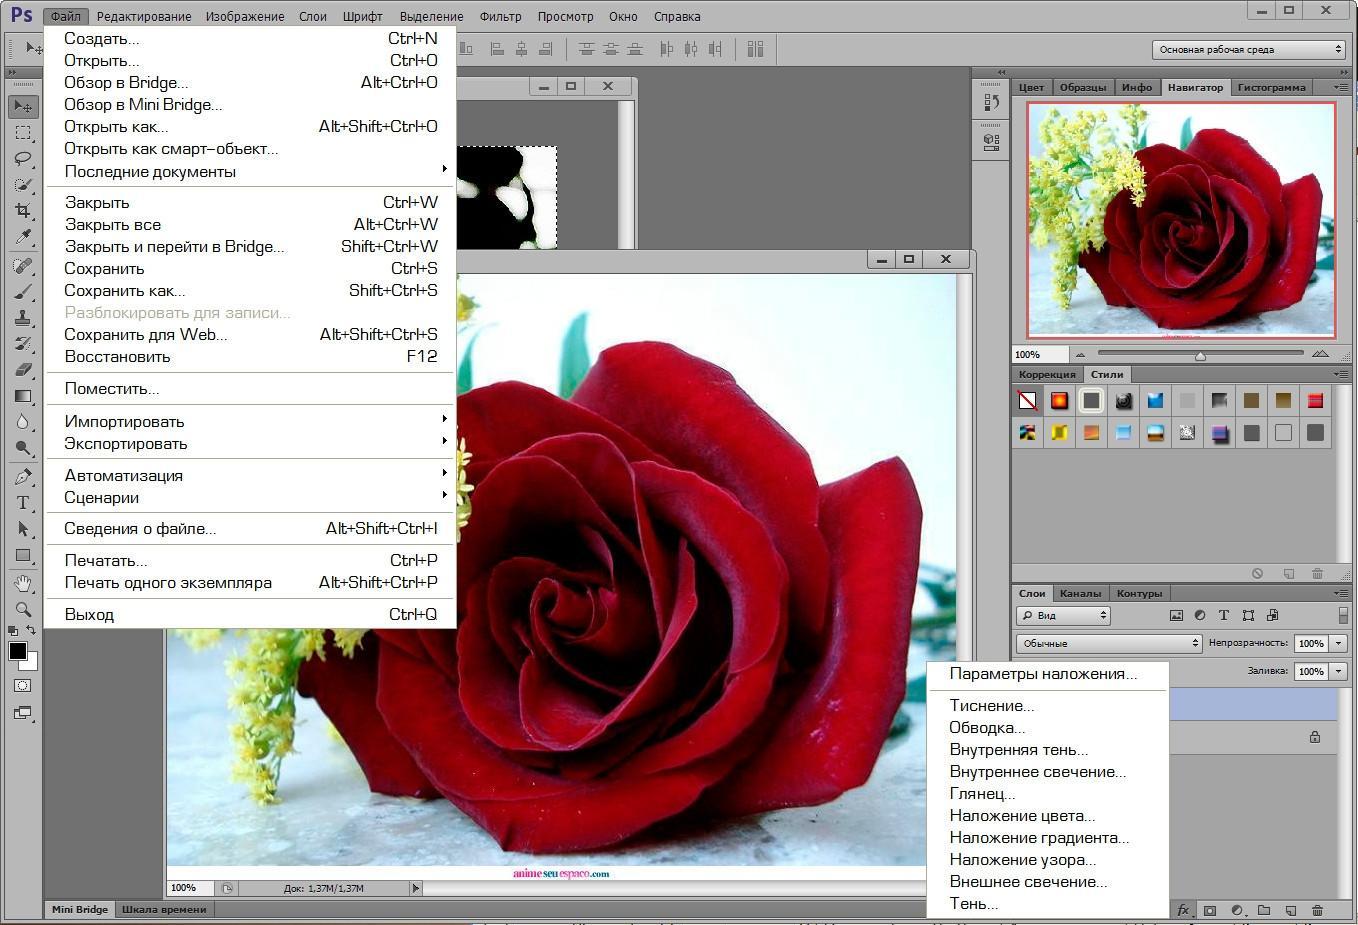 Adobe Photoshop Cs5 Free Download Full Version With Crack For Mac